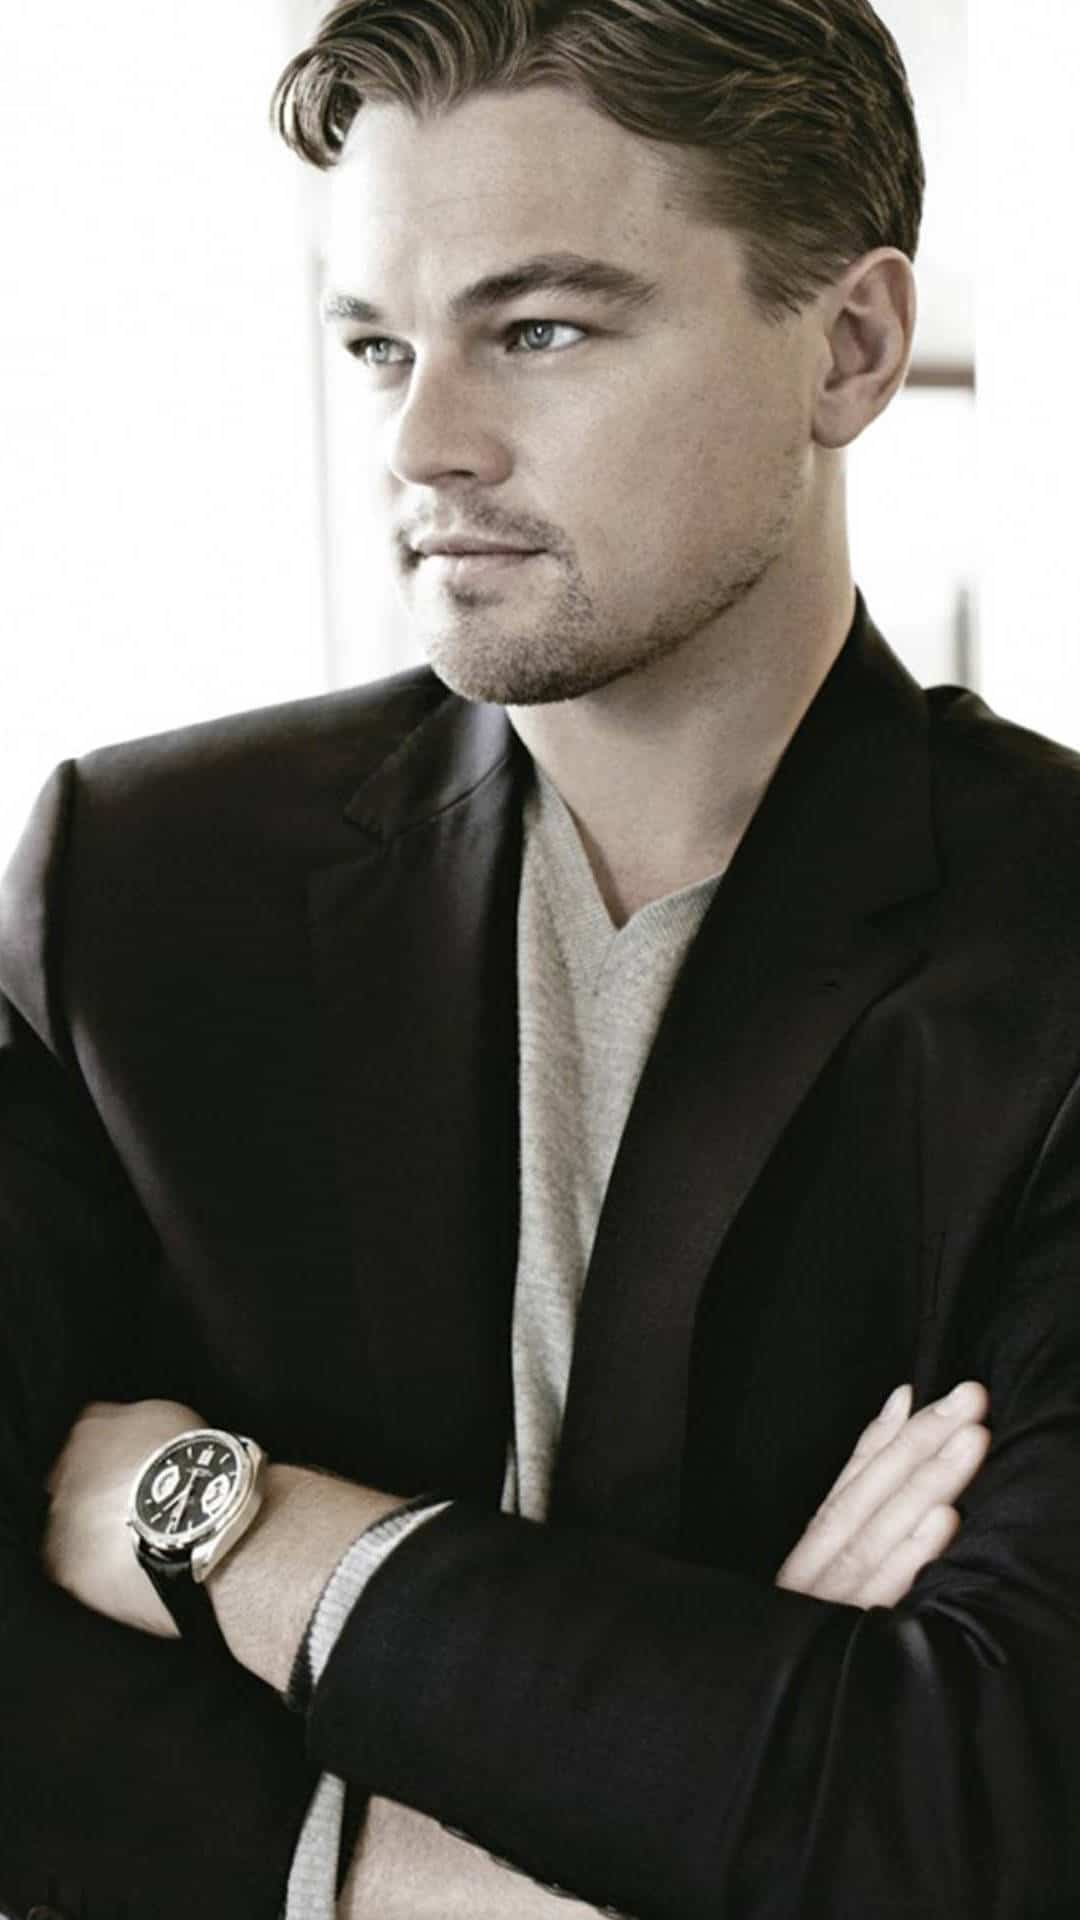 28 Leonardo dicaprio Wallpapers for iPhone - Apple Lives1080 x 1920